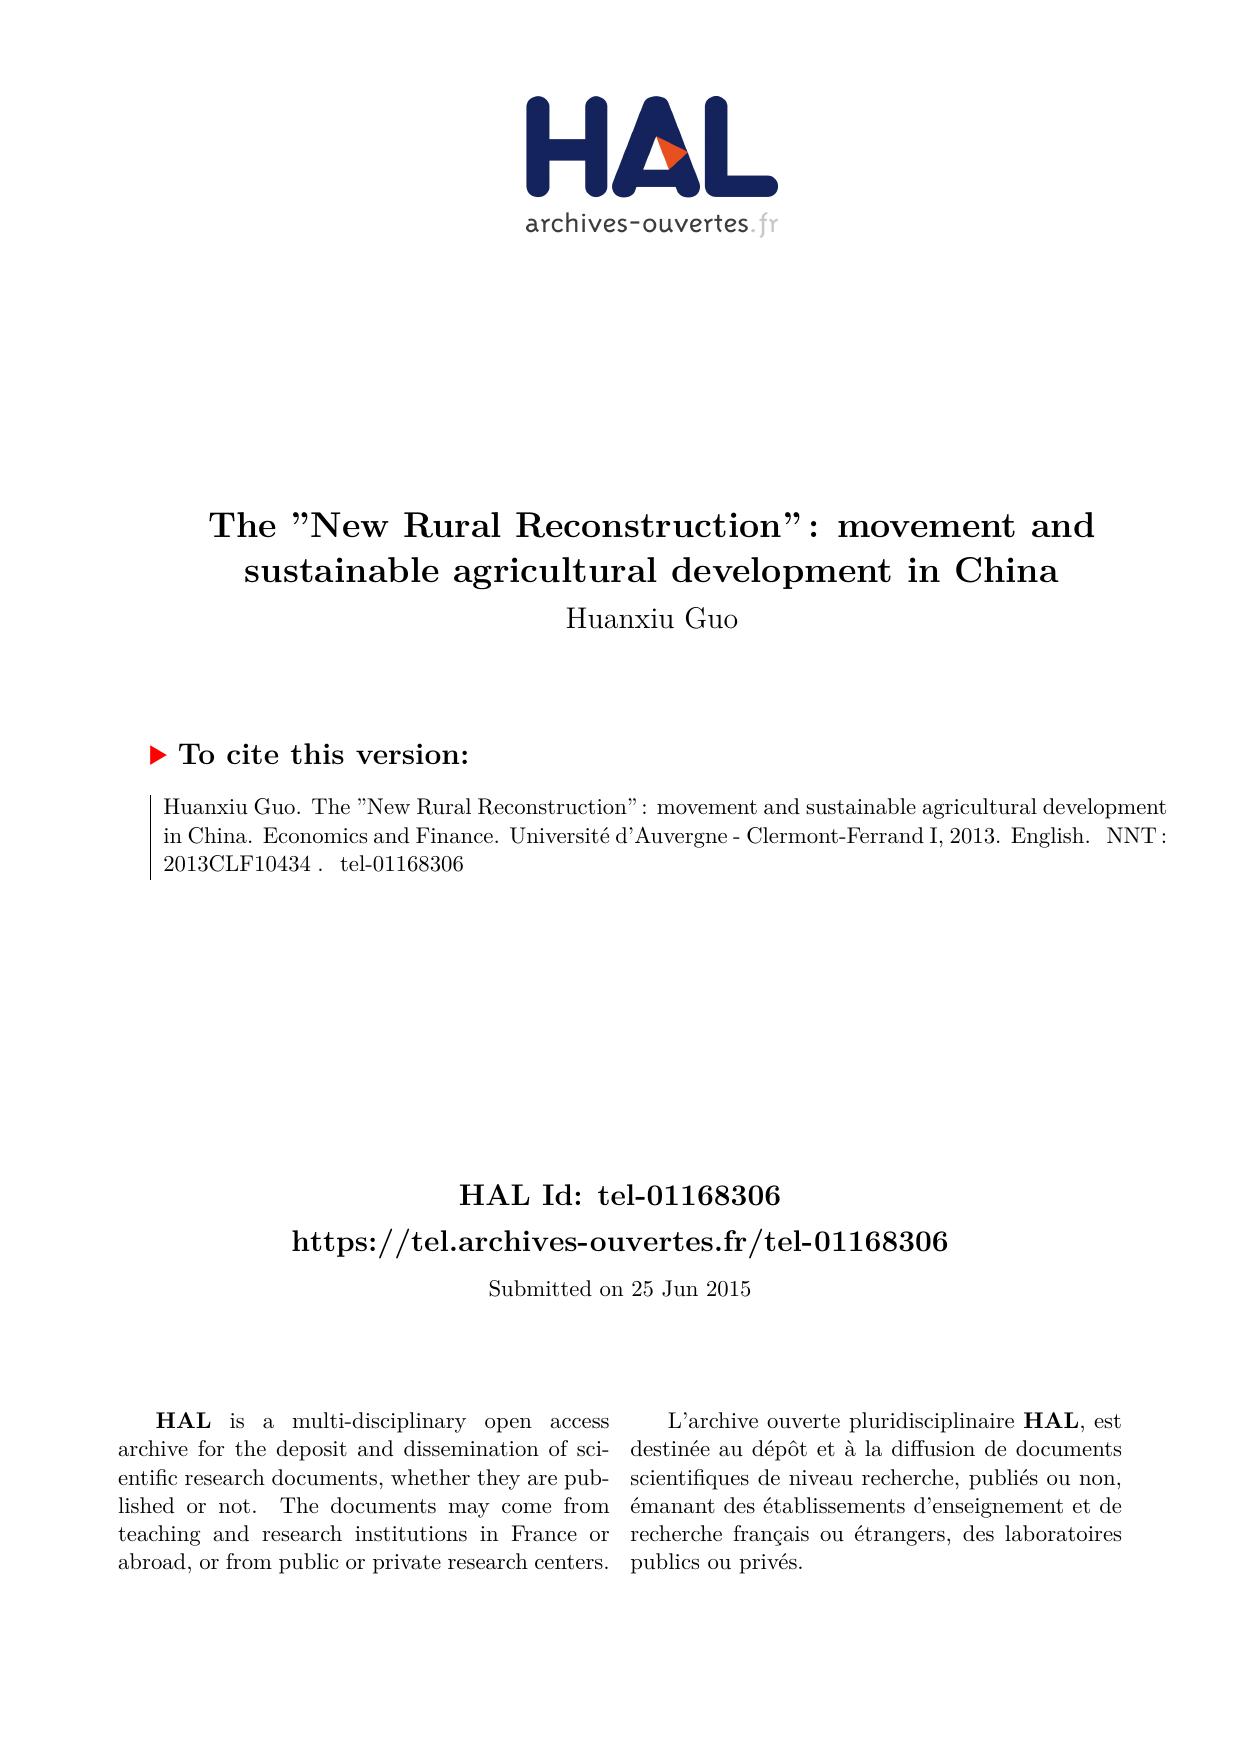 The ''New Rural Reconstruction'': movement and sustainable agricultural development in China